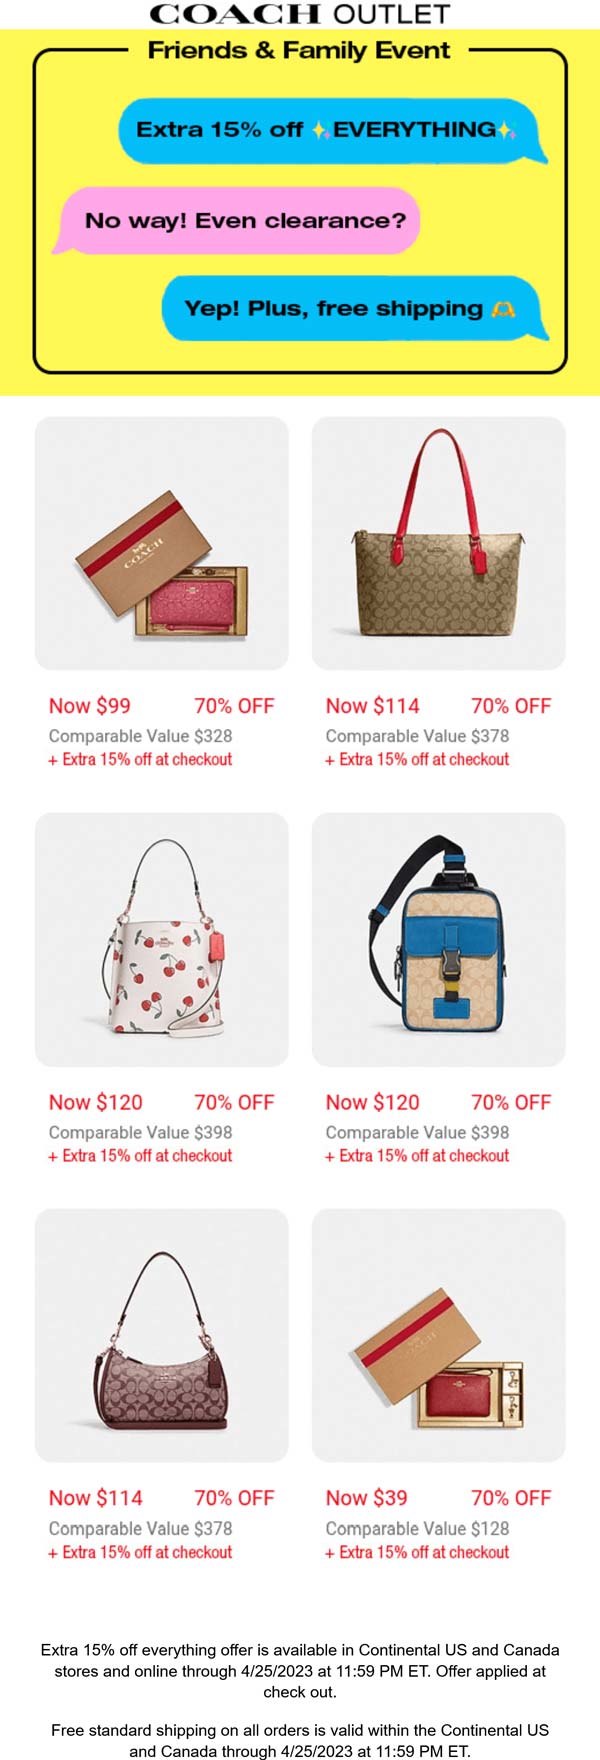 Coach Outlet stores Coupon  Extra 15% off everything at Coach Outlet, ditto online #coachoutlet 